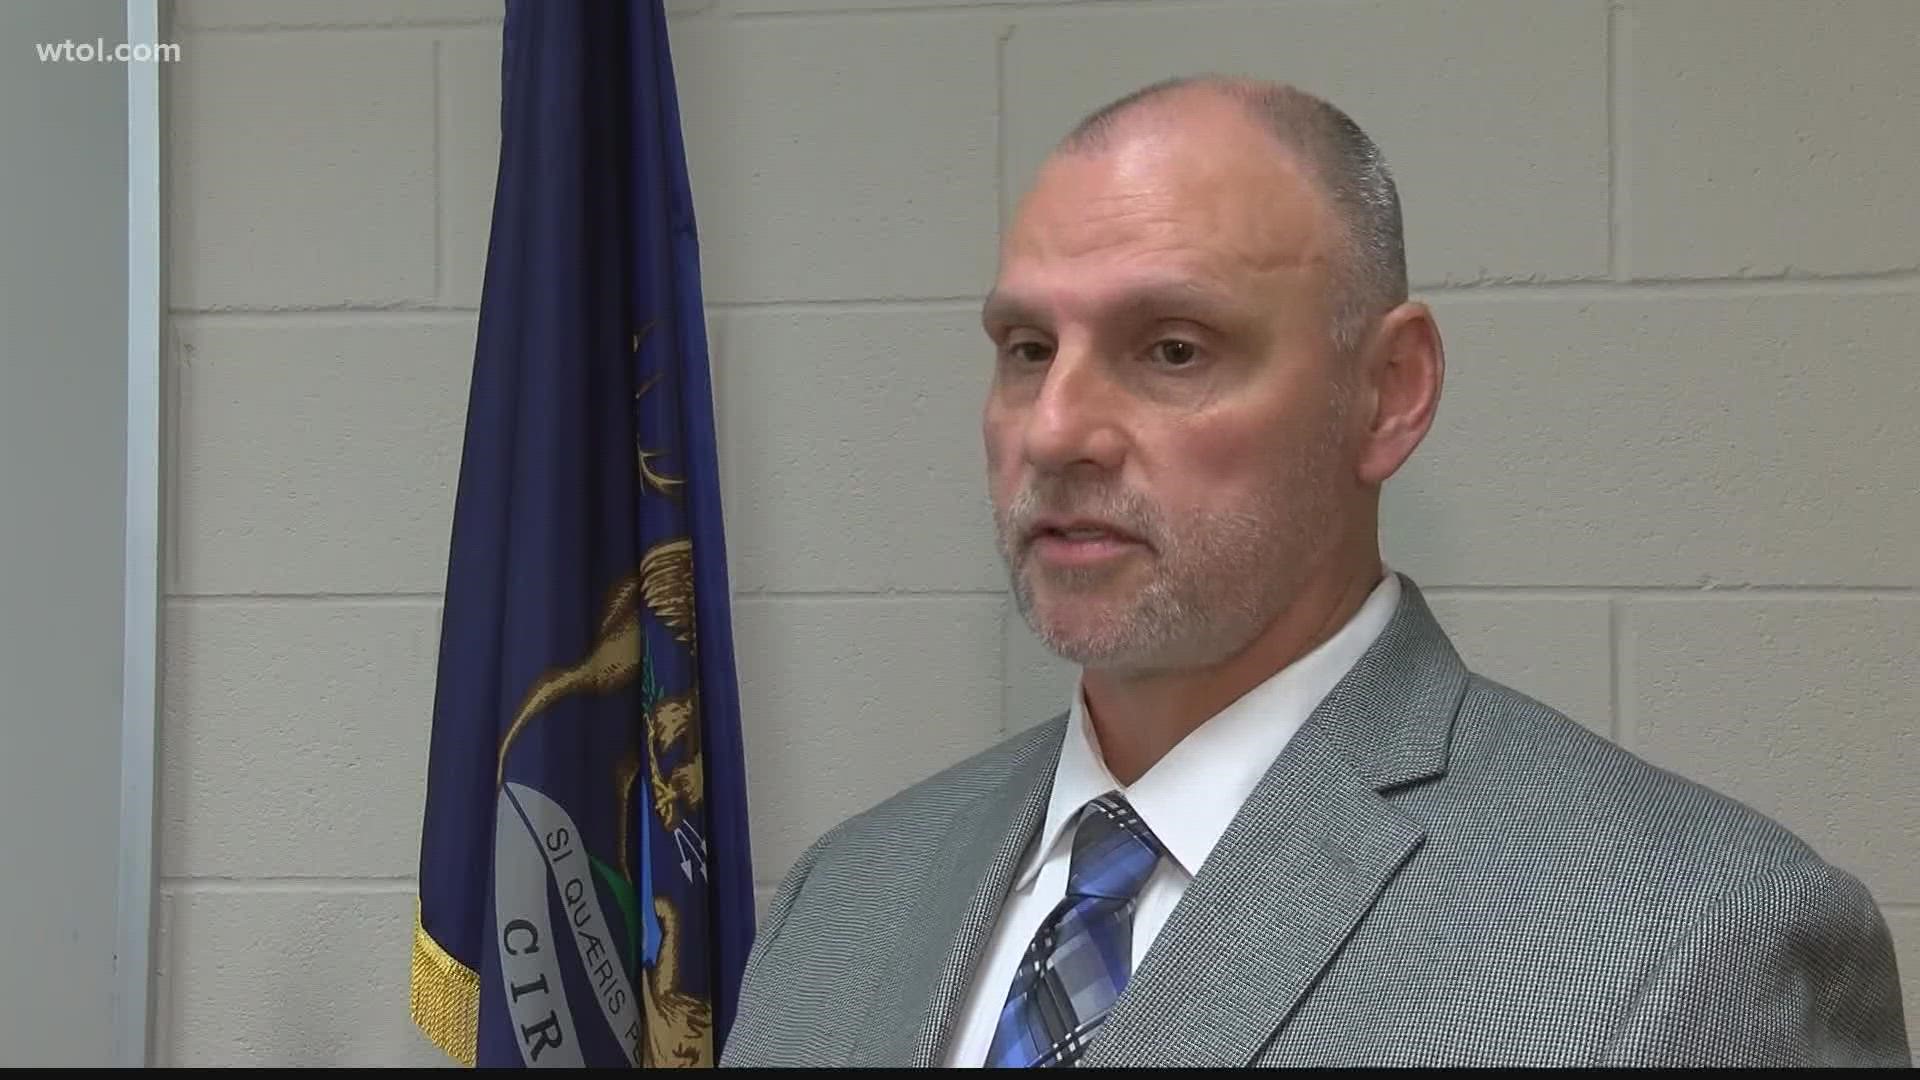 Michigan State Police received a tip through the OK2SAY app. Superintendent Rick Hilderley says they are satisfied the incident has been dealt with